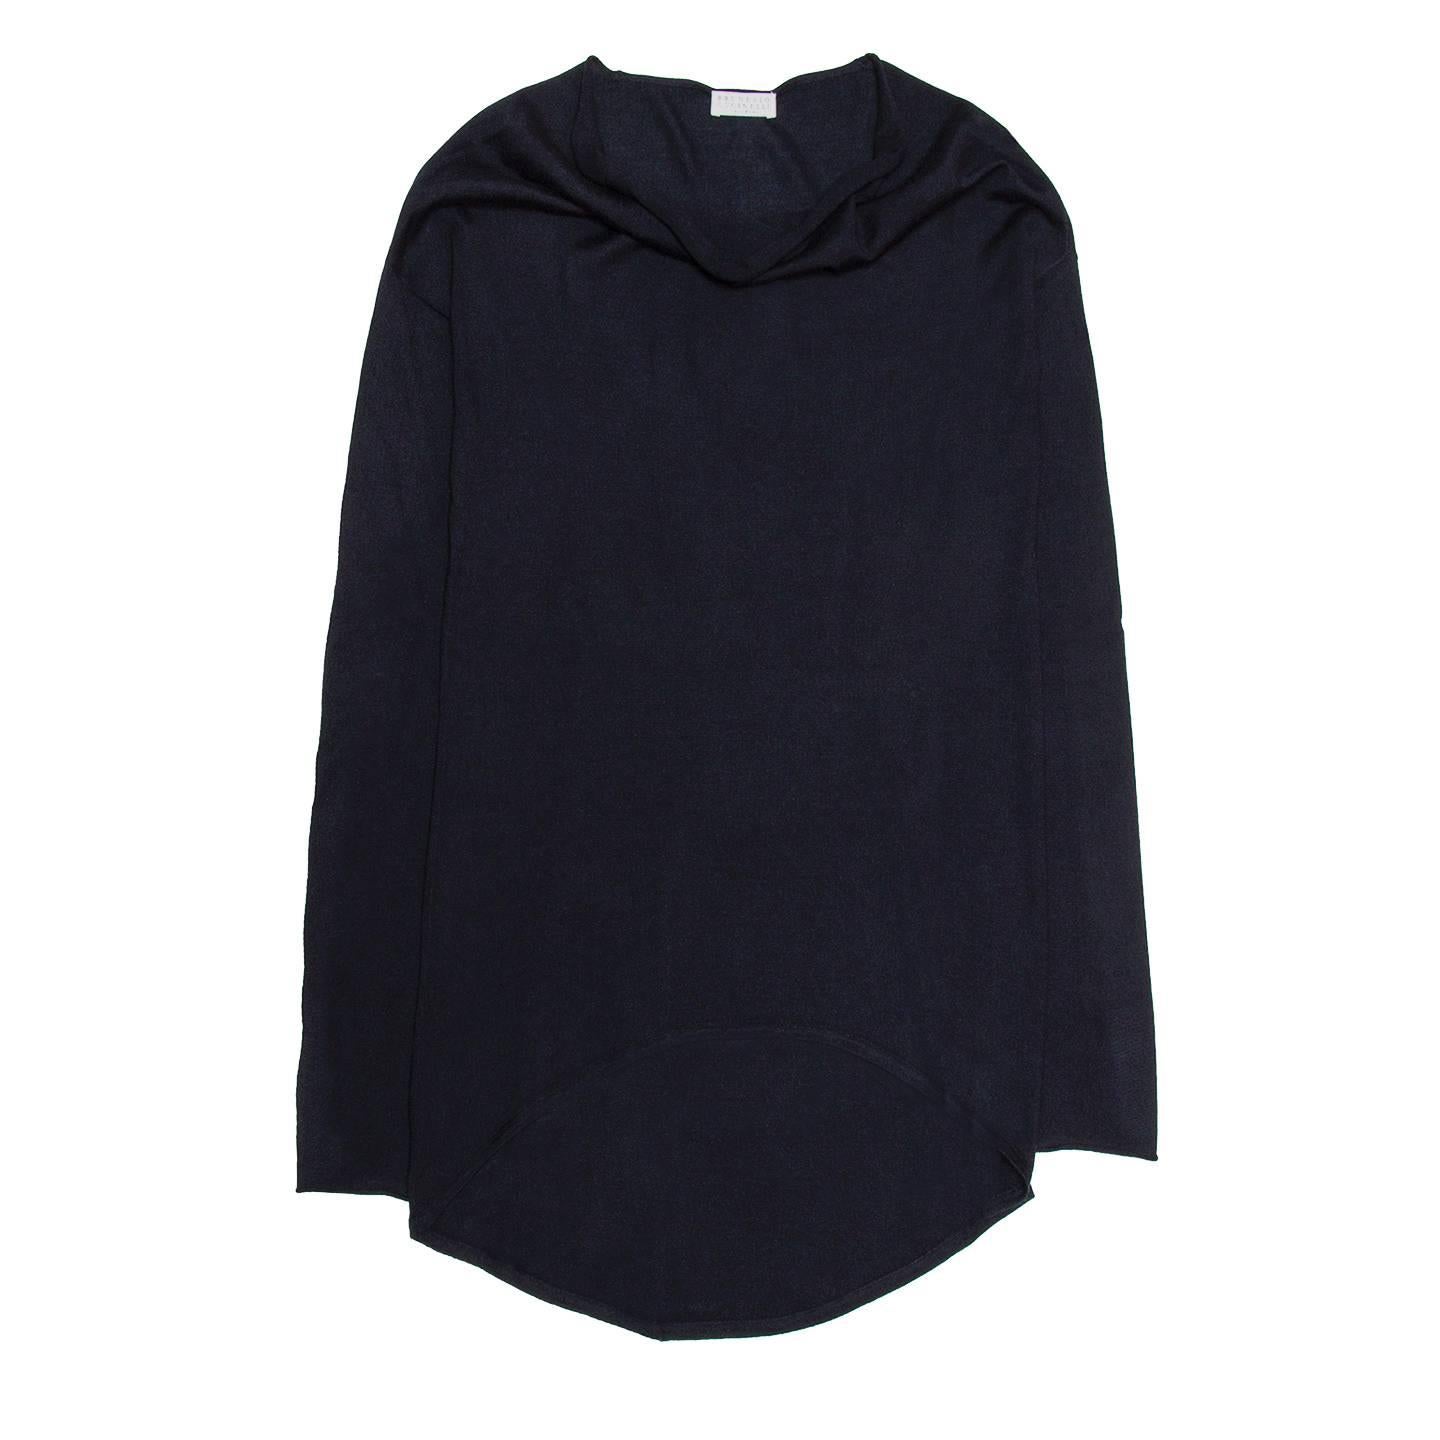 Navy blue cashmere and silk long feather light pullover with cowl neck. The hem is 
shaped round and the front is shorter than the back.

Size  M Universal sizing

Condition  Excellent: worn once